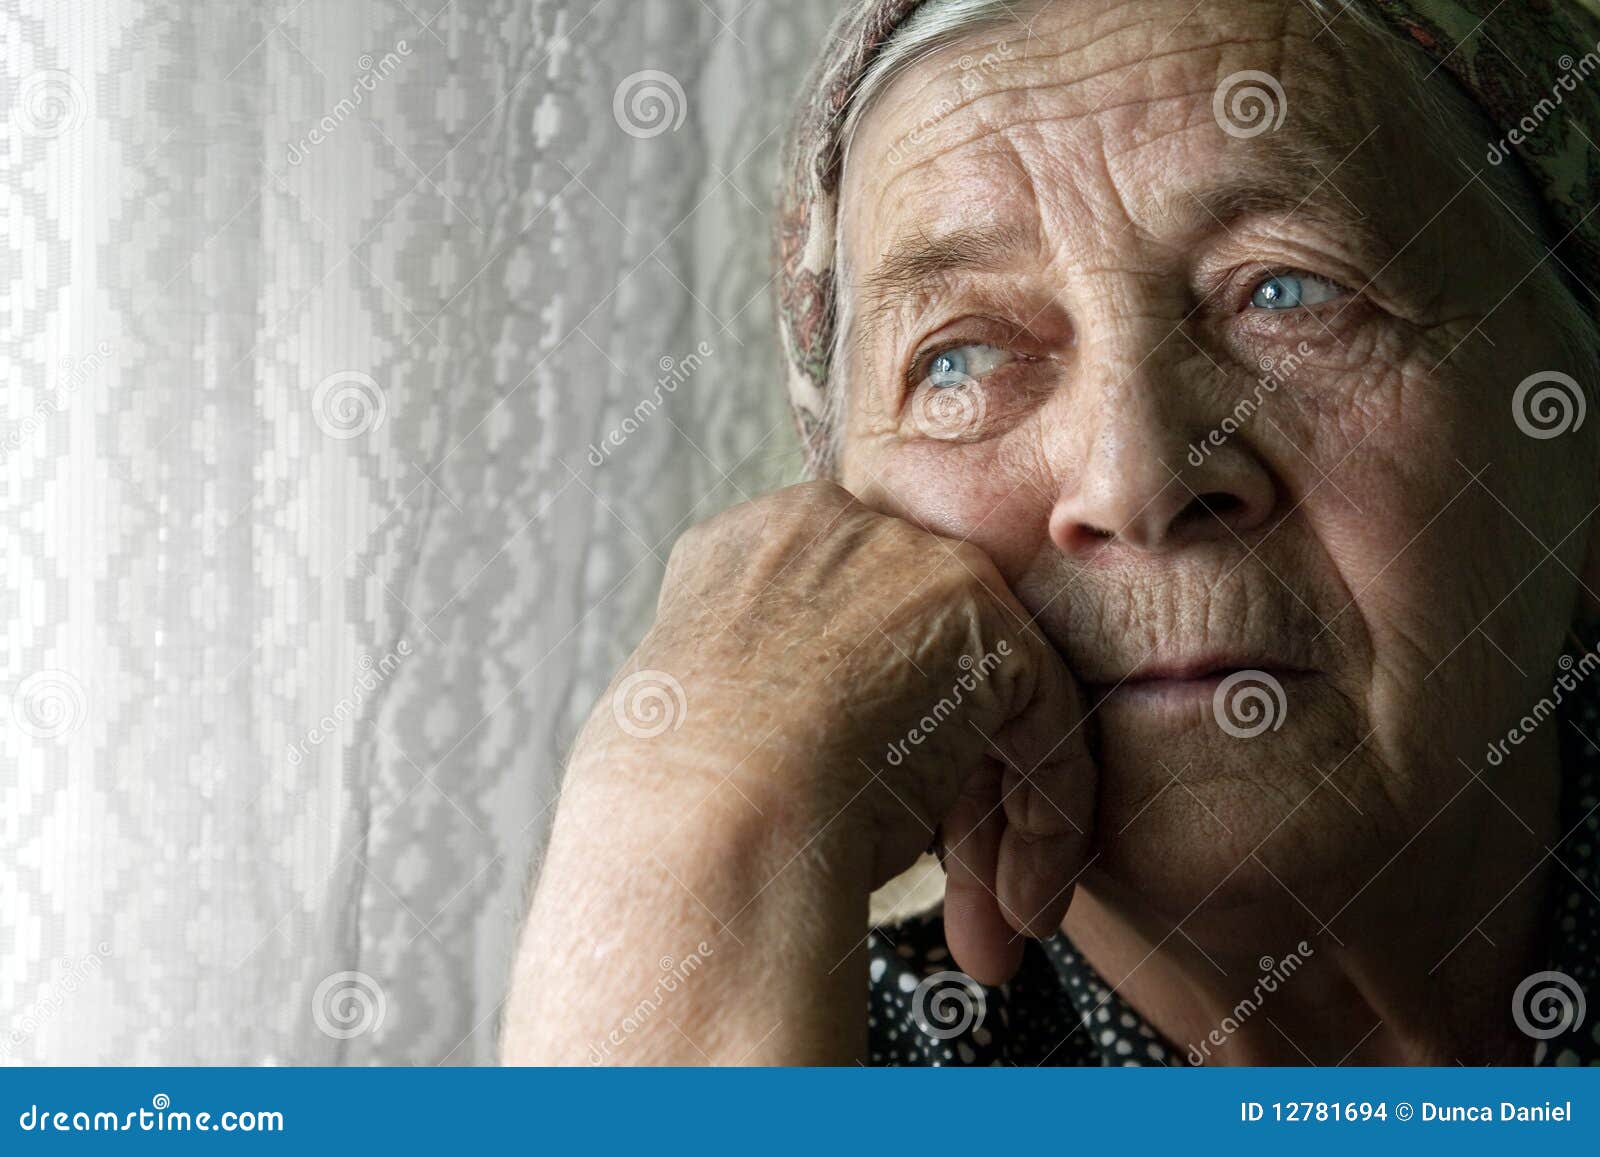 Sad Lonely Pensive Old Senior Woman Stock Photo - Image of ...